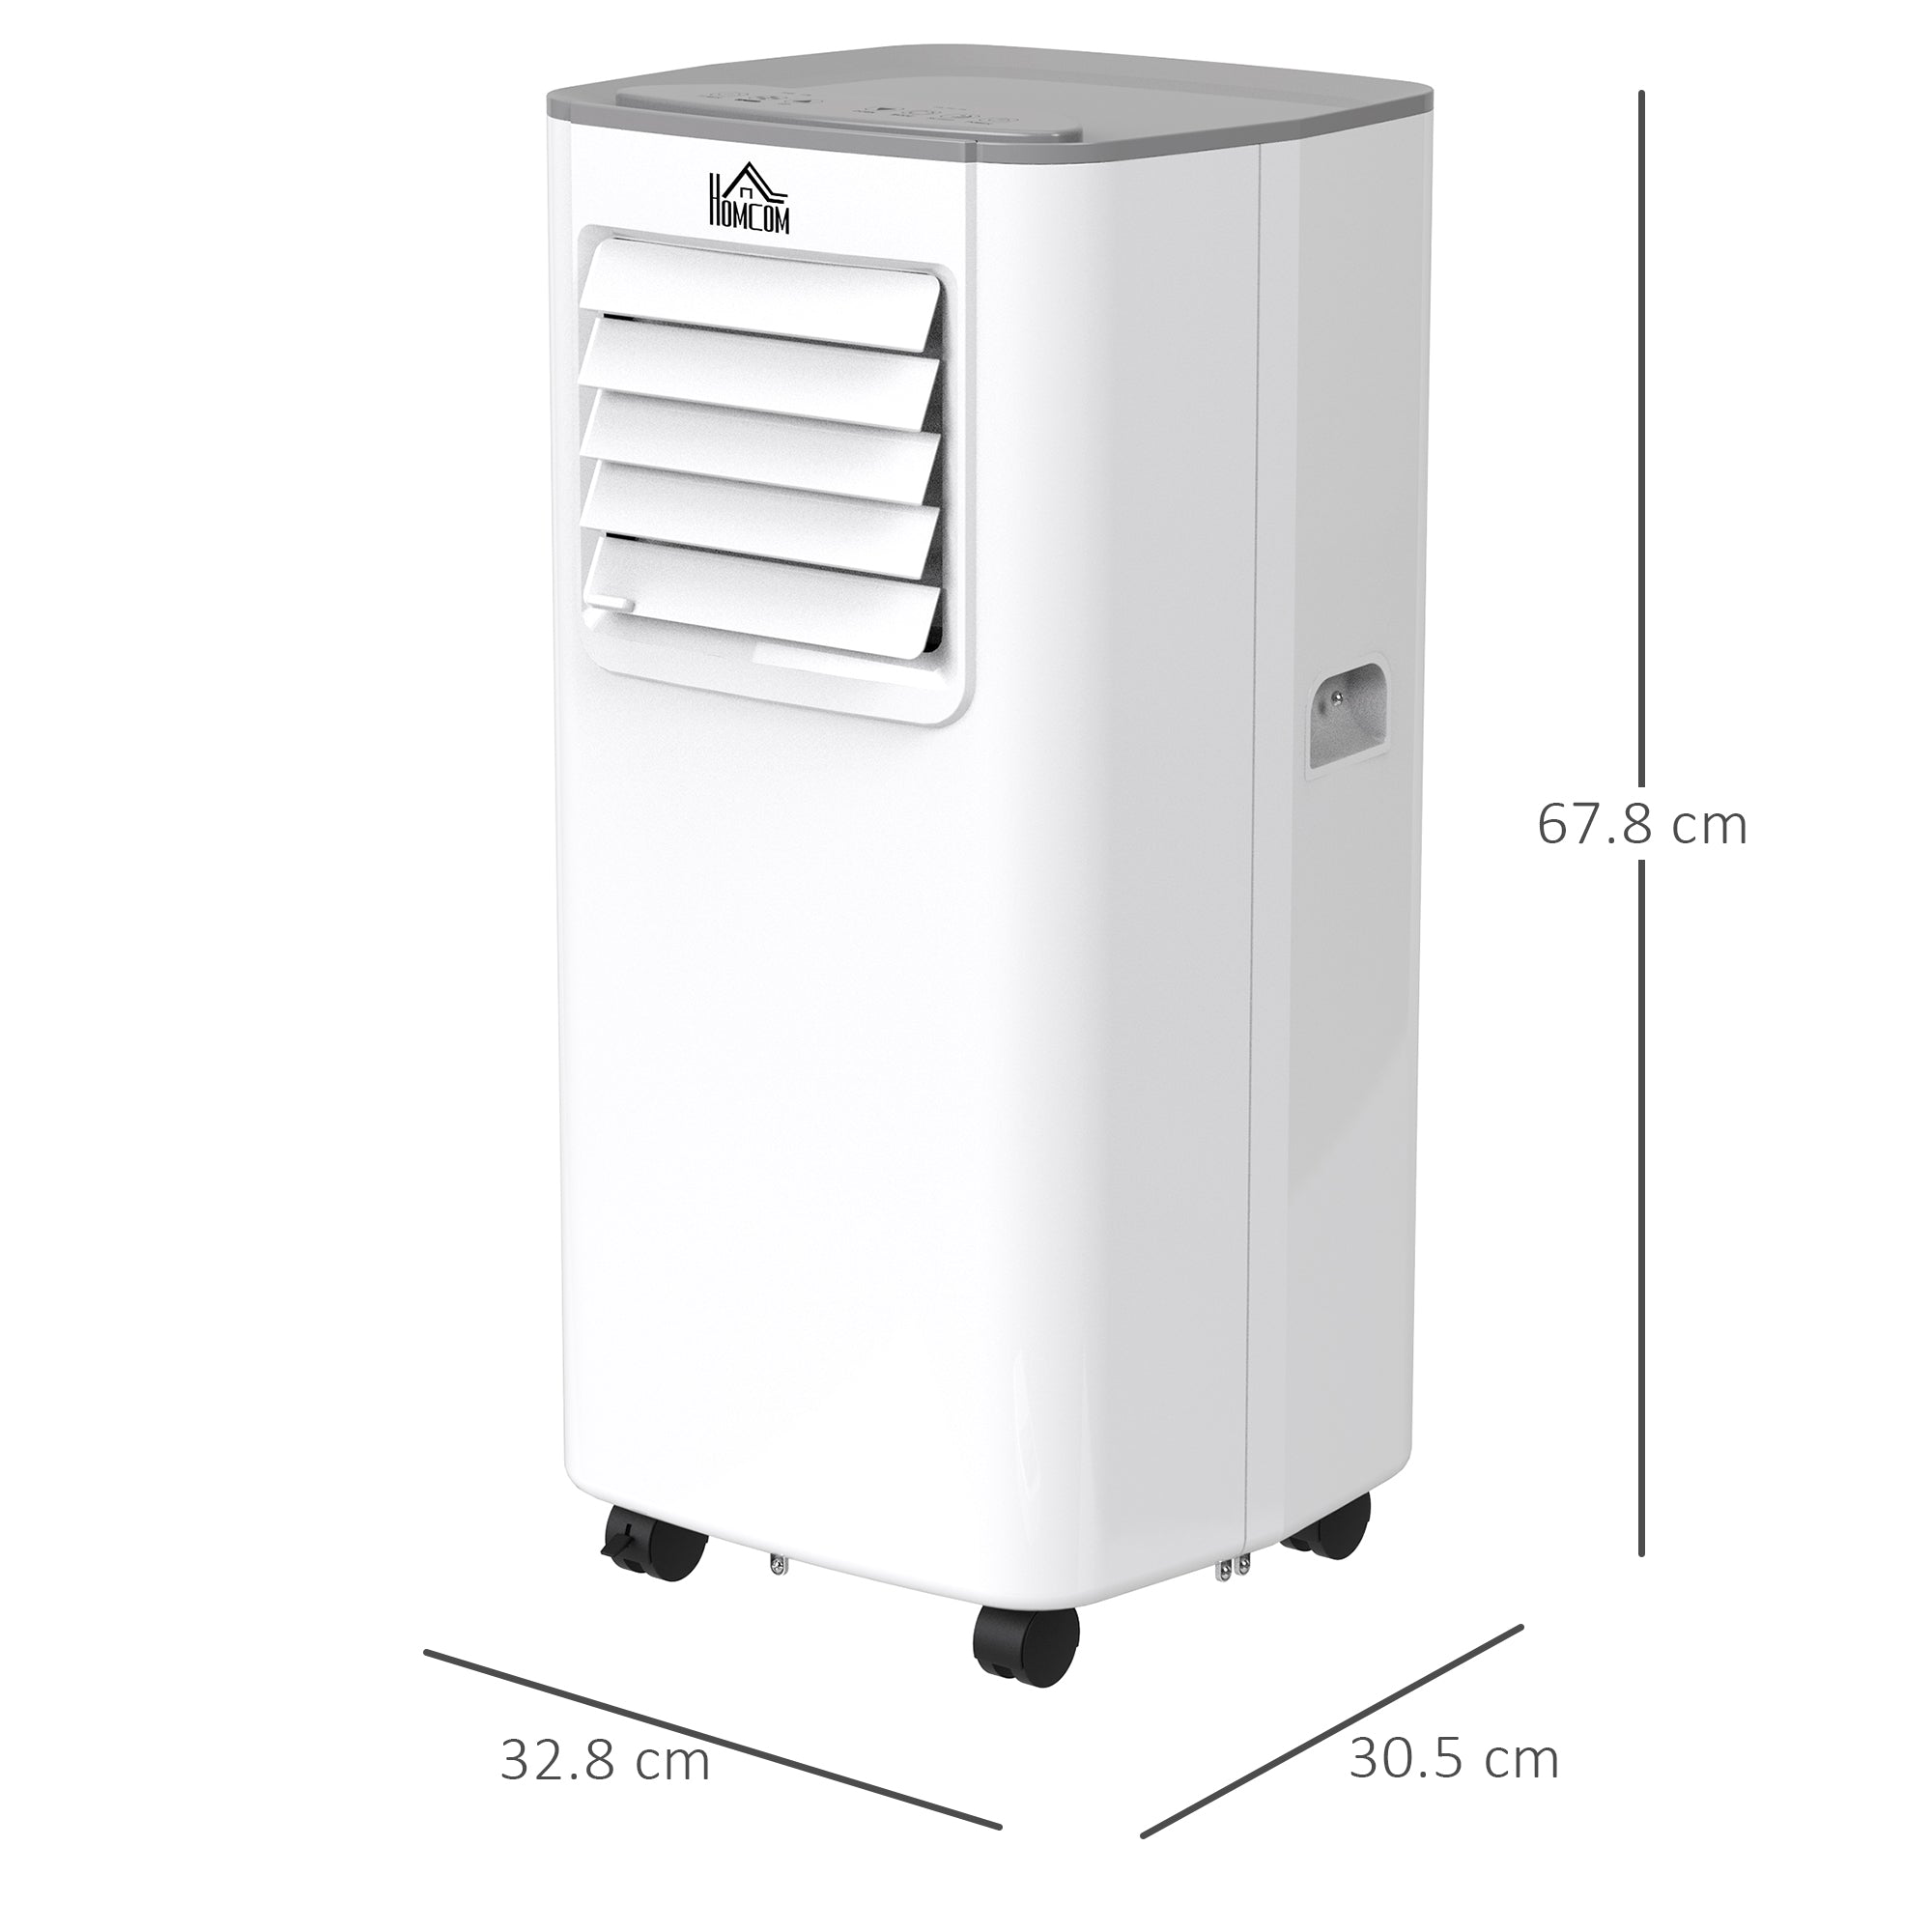 5000 BTU 4-In-1 Compact Portable Mobile Air Conditioner Unit Cooling Dehumidifying Ventilating w/ Fan Remote LED 24hTimer Auto Shut Down White-2